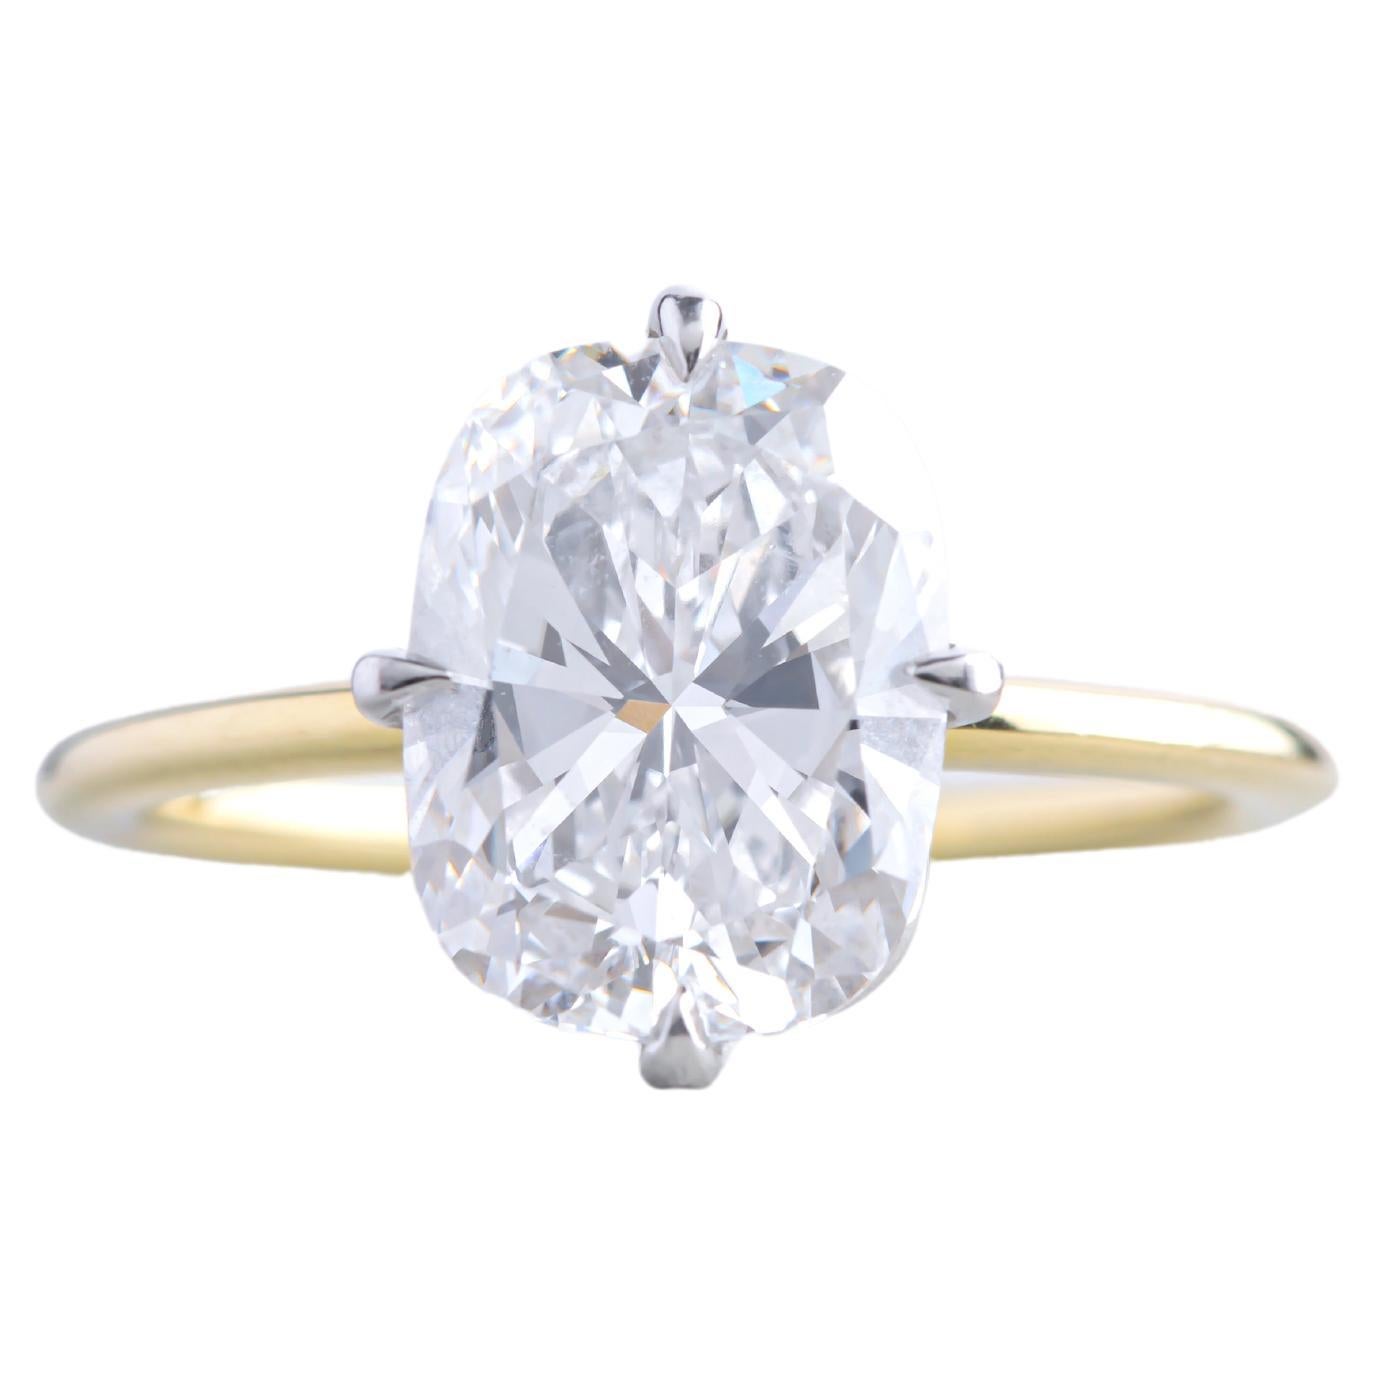 GIA certified beautiful elongated cushion cut diamond set in a delicate compass prong setting. This stone is one of a kind, and a very unique cut. The diamond is extremely high quality, with D color and VVS2 clarity. Currently set in a delicate 18k